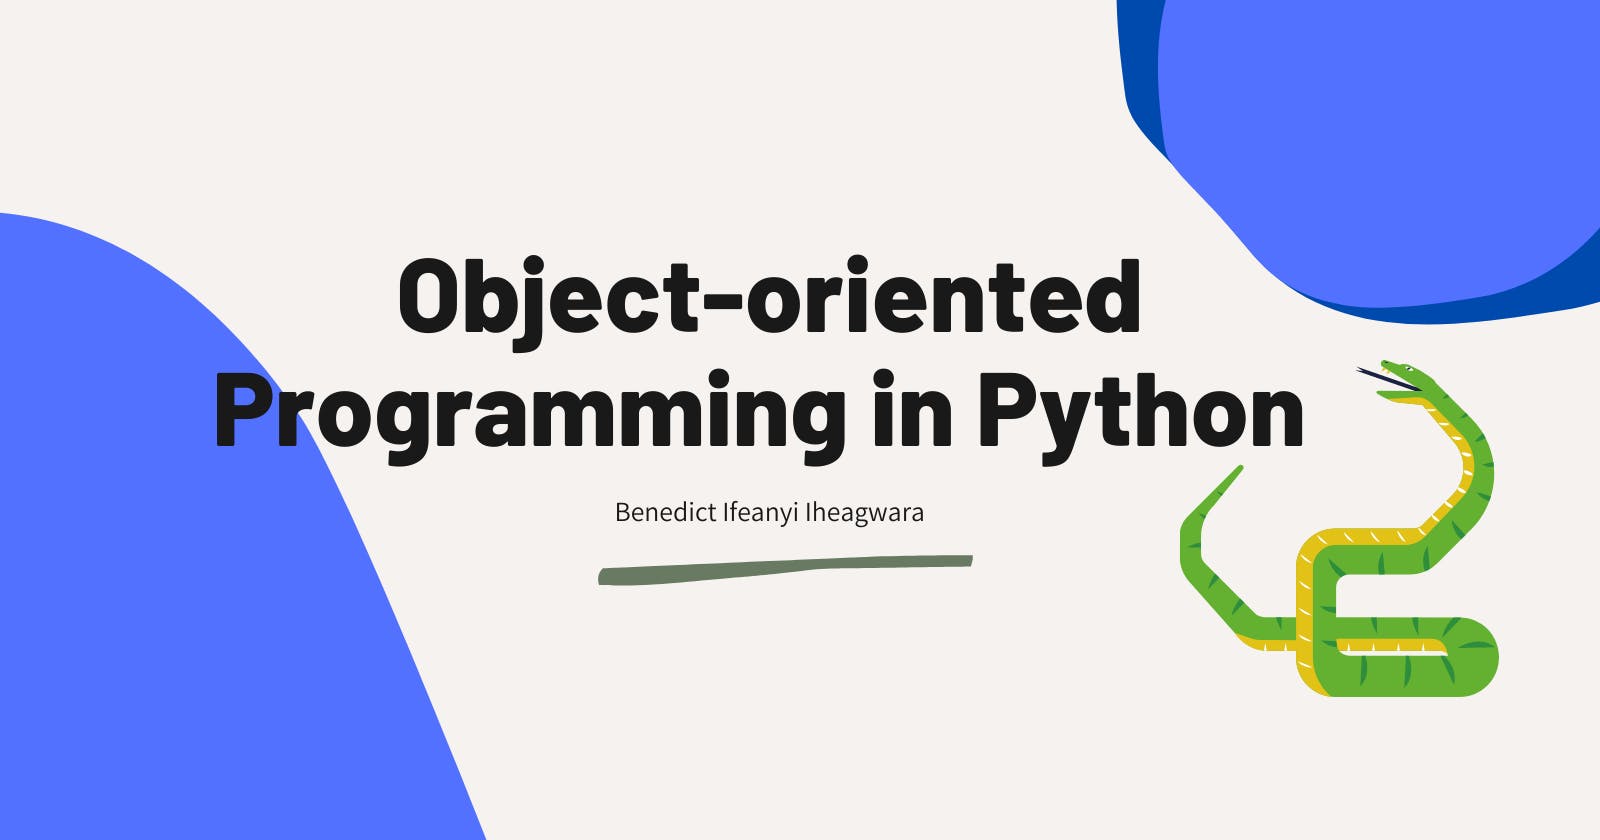 Object-oriented Programming in Python 🐍🐍